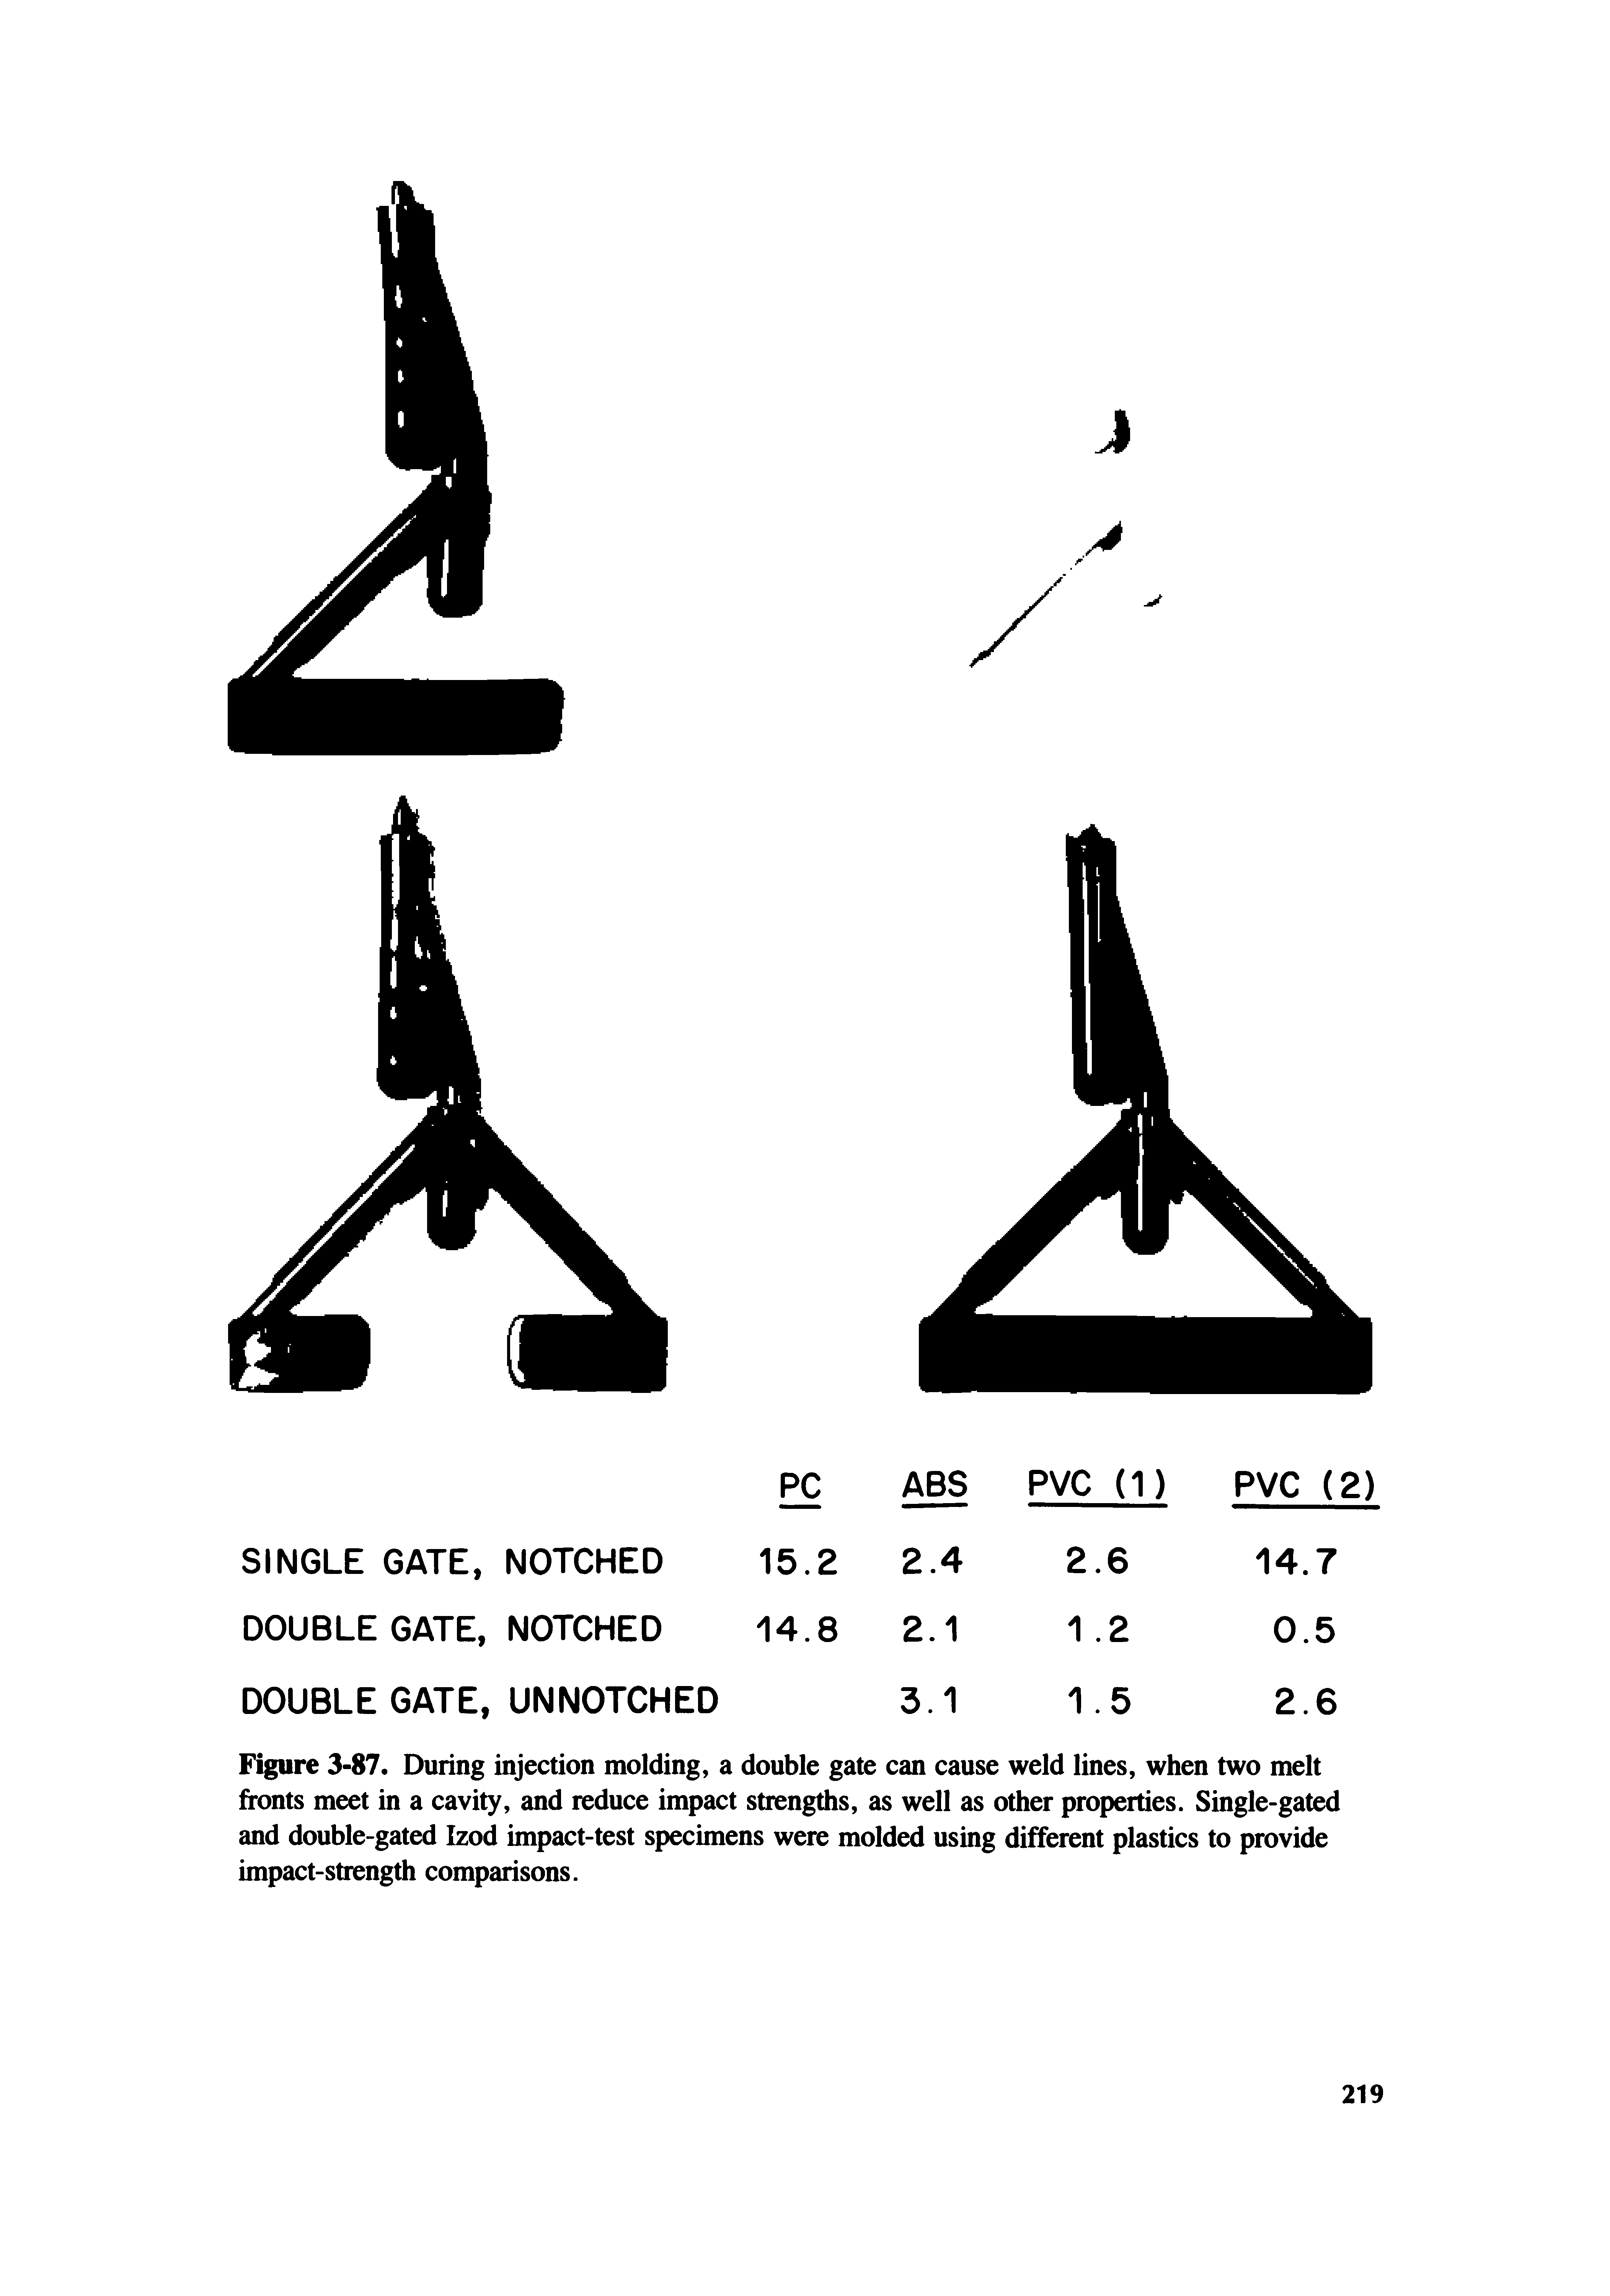 Figure 3-87. During injection molding, a double gate can cause weld lines, when two melt fronts meet in a cavity, and reduce impact strengths, as well as other properties. Single-gated and double-gated Izod impact-test specimens were molded using different plastics to provide impact-strength comparisons.